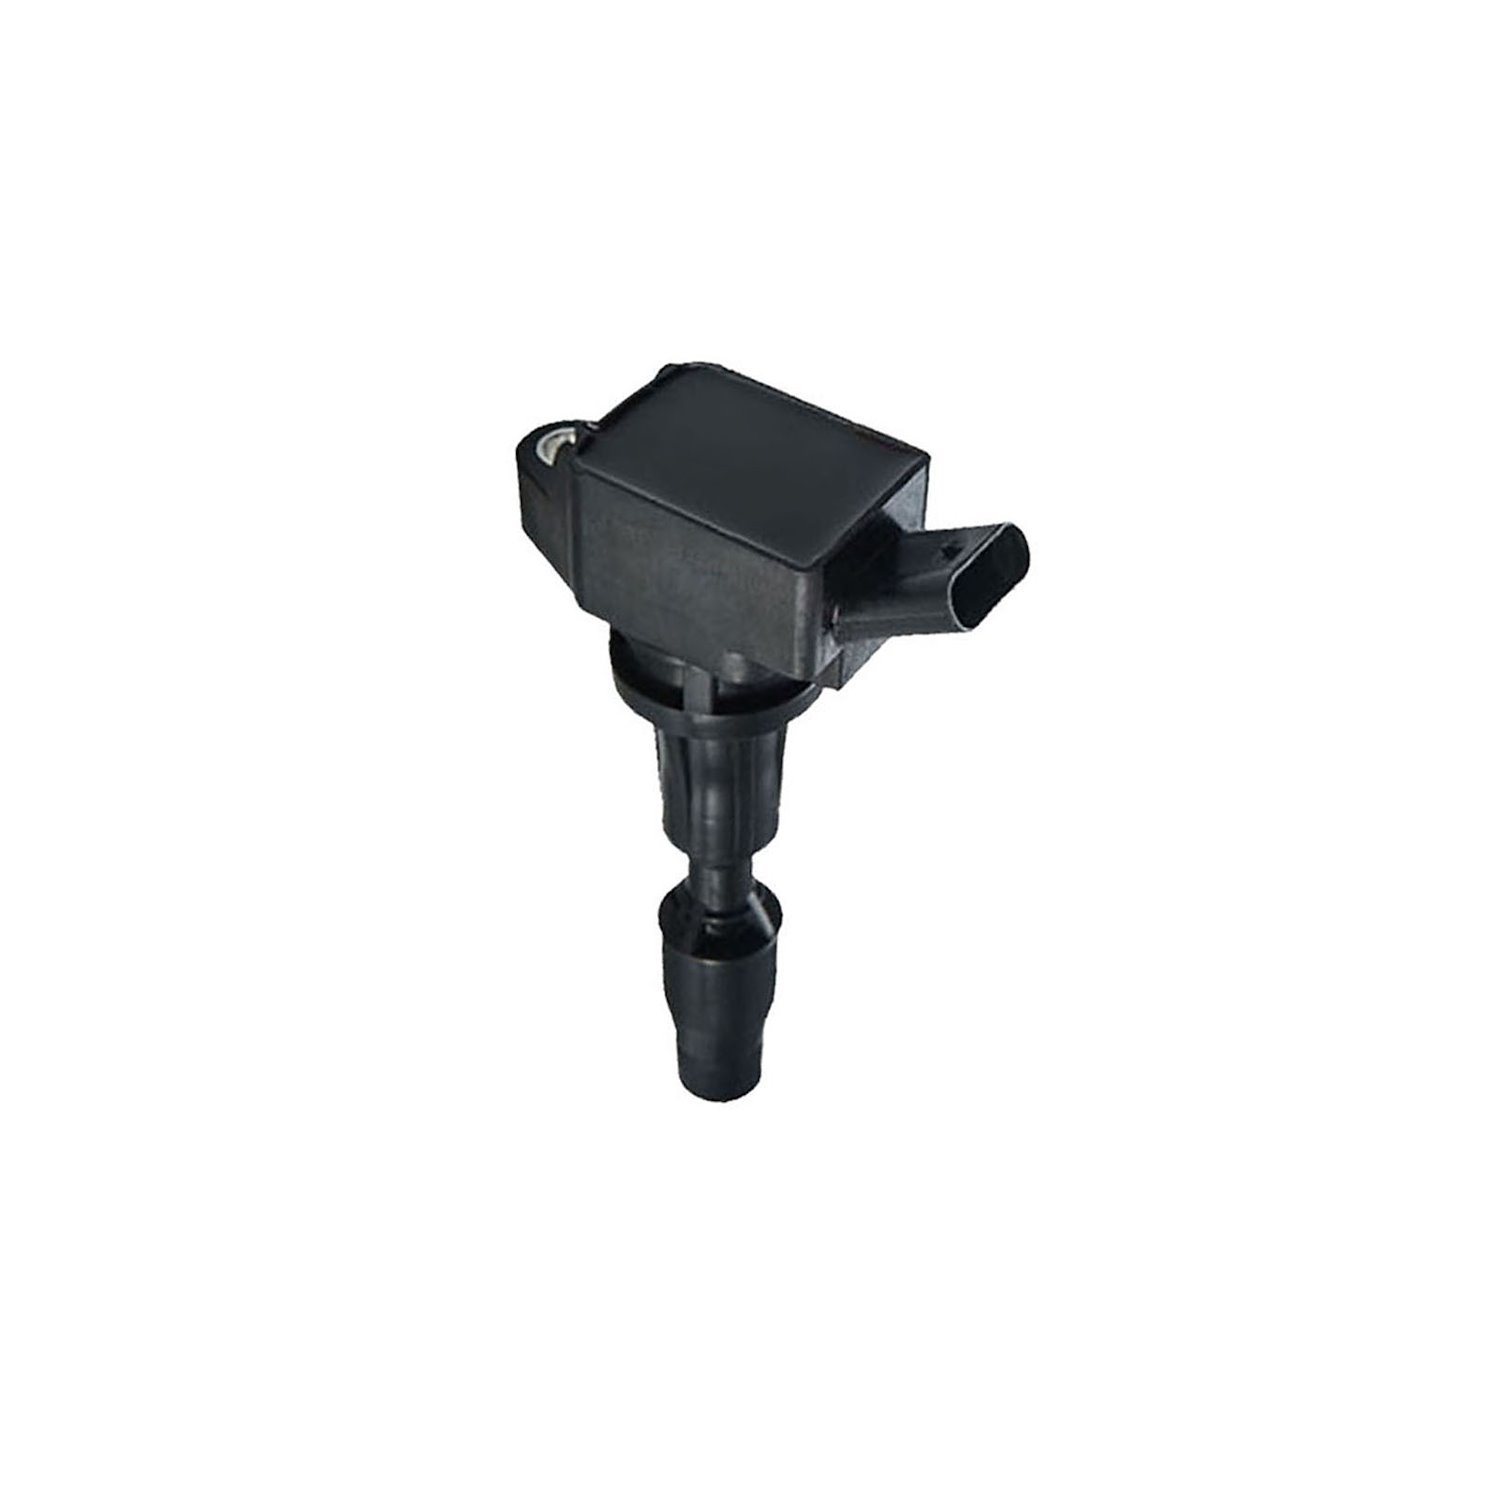 OE Replacement Ignition Coil for Hyundai Tucson Kia